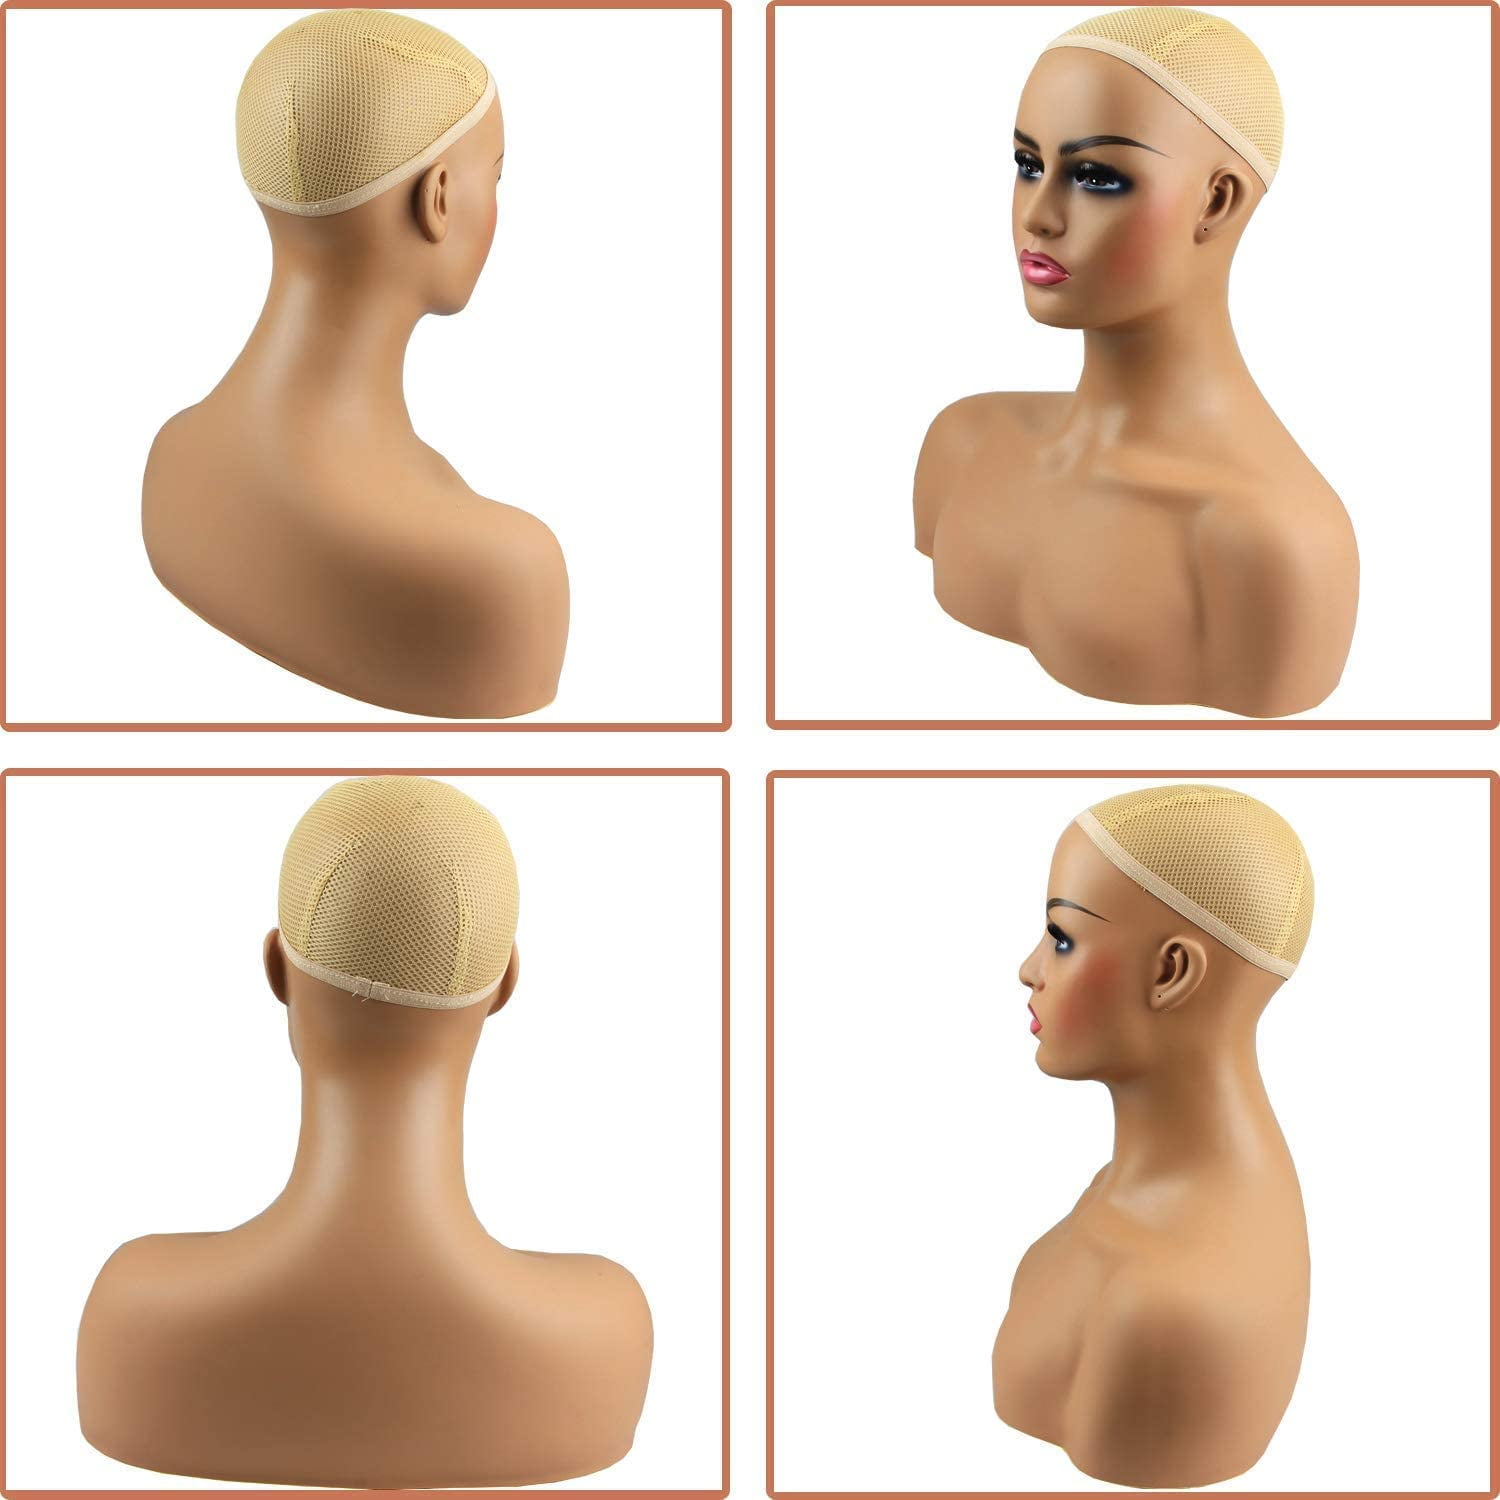 Beavorty 3pcs mannequin head wig holder wig head hair maniquins head wigs  wig storage mannequin display head model manican heads wig stand fursuit